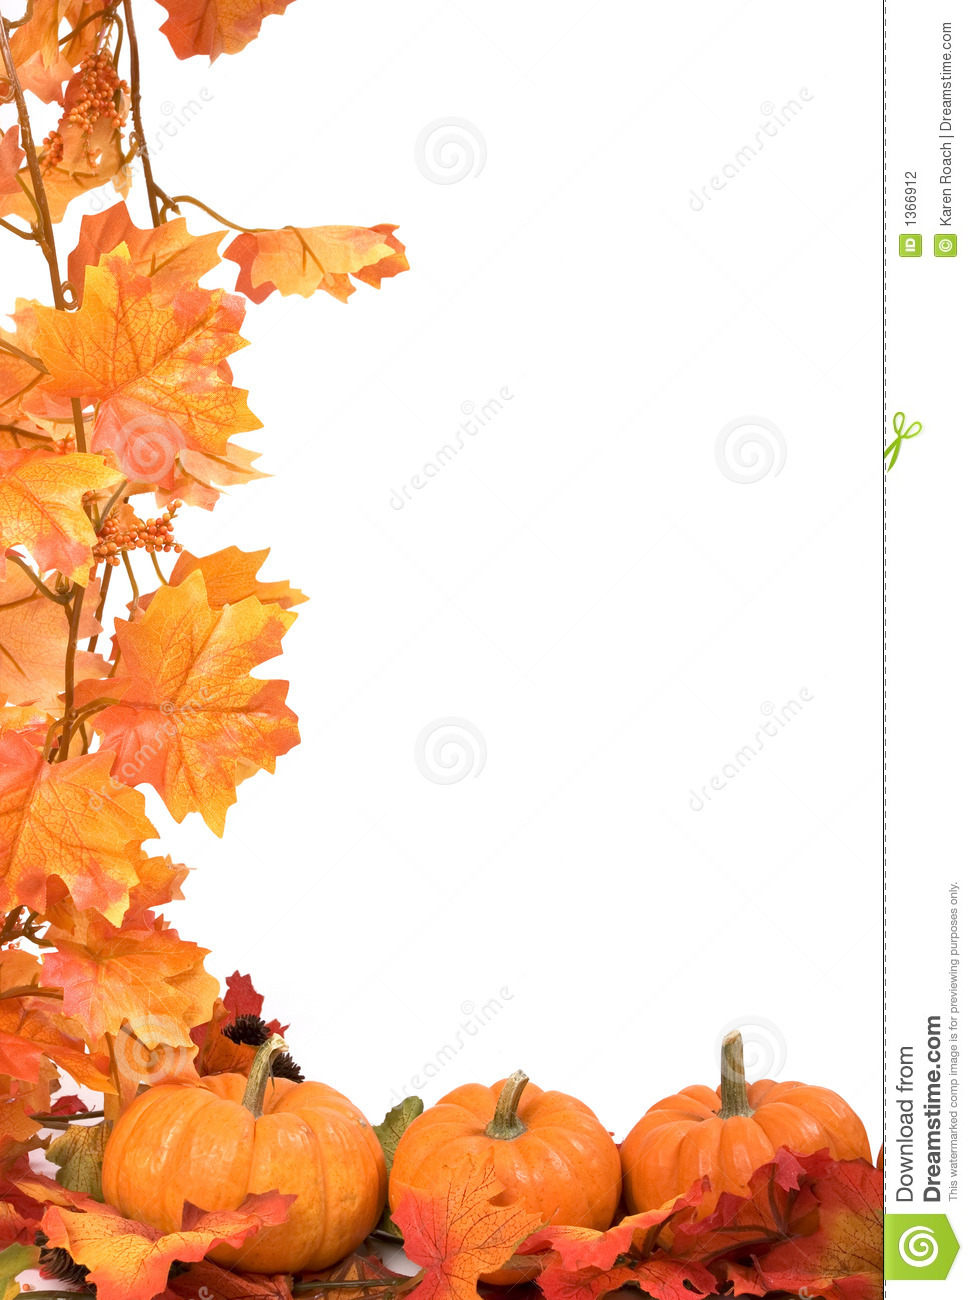 More Similar Stock Images Of   Pumpkins With Fall Leaves  